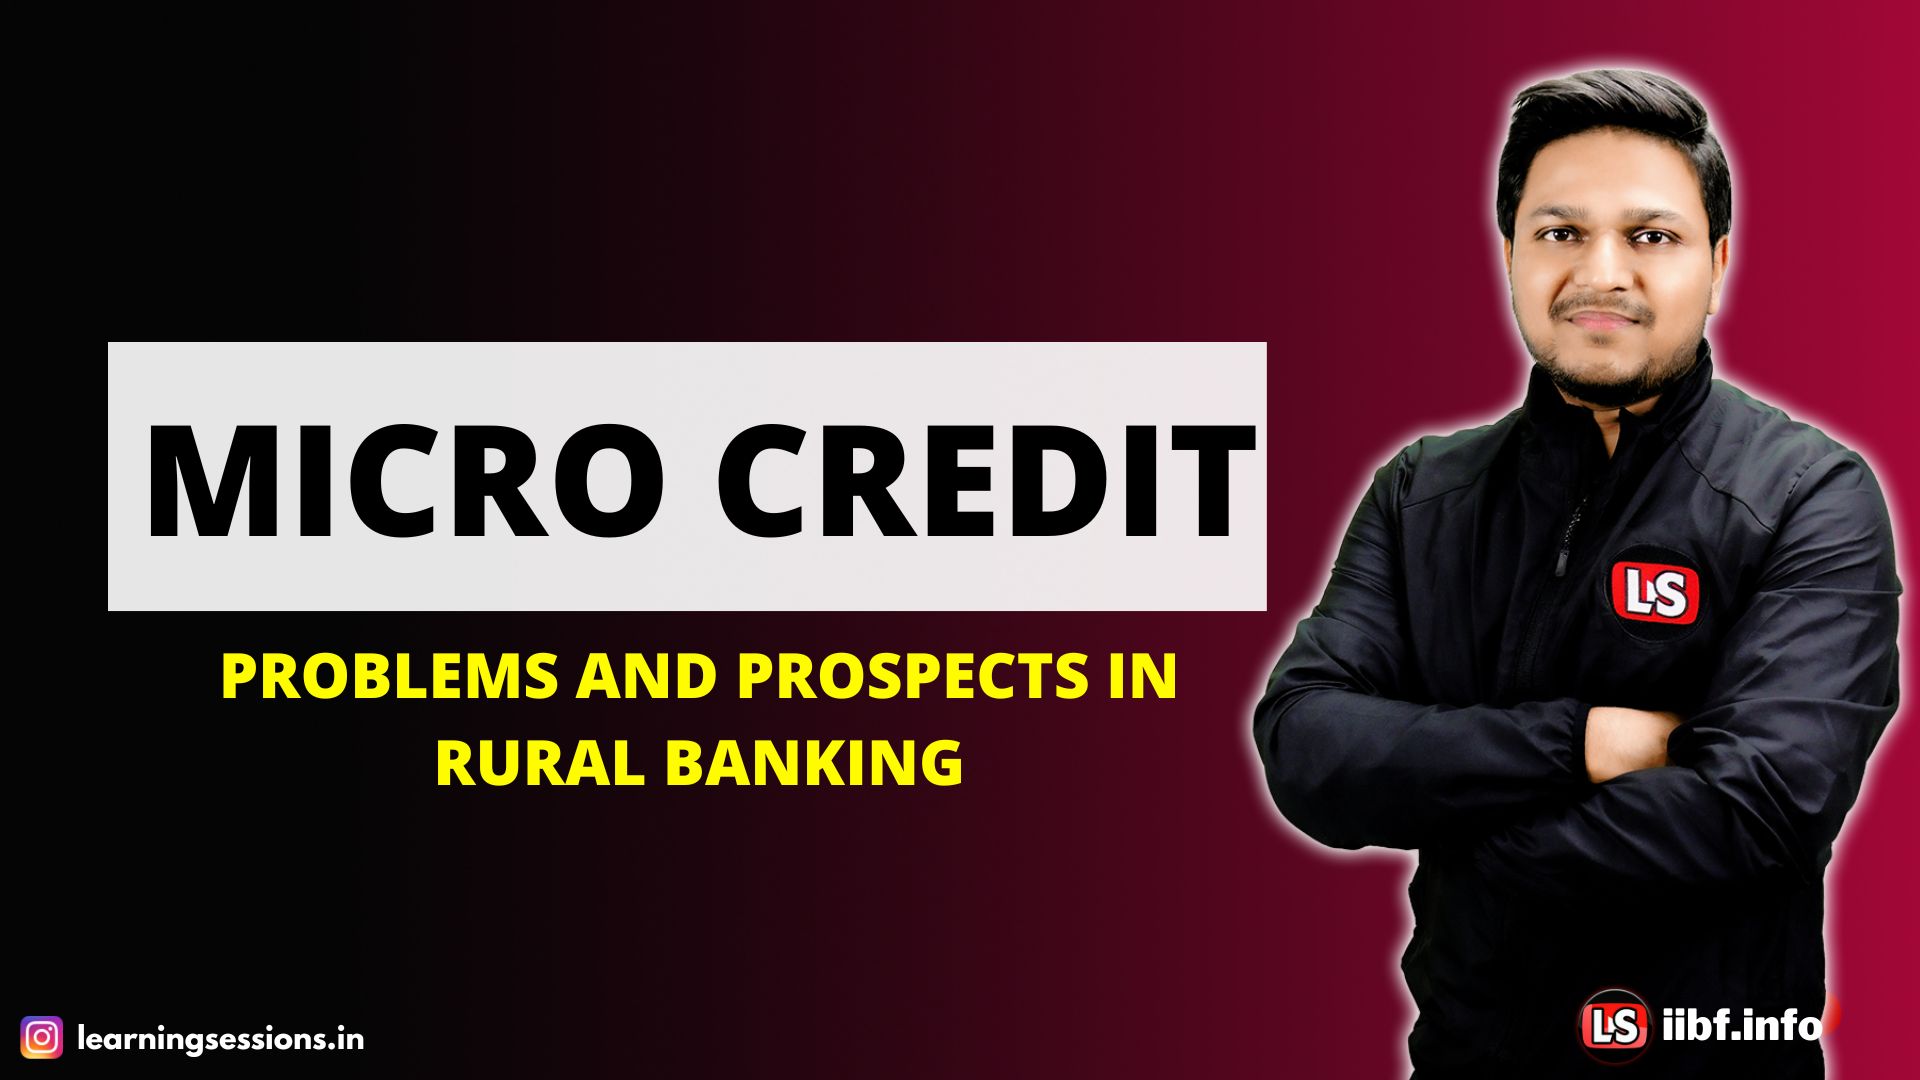 MICRO CREDIT | PROBLEMS AND PROSPECTS IN RURAL BANKING